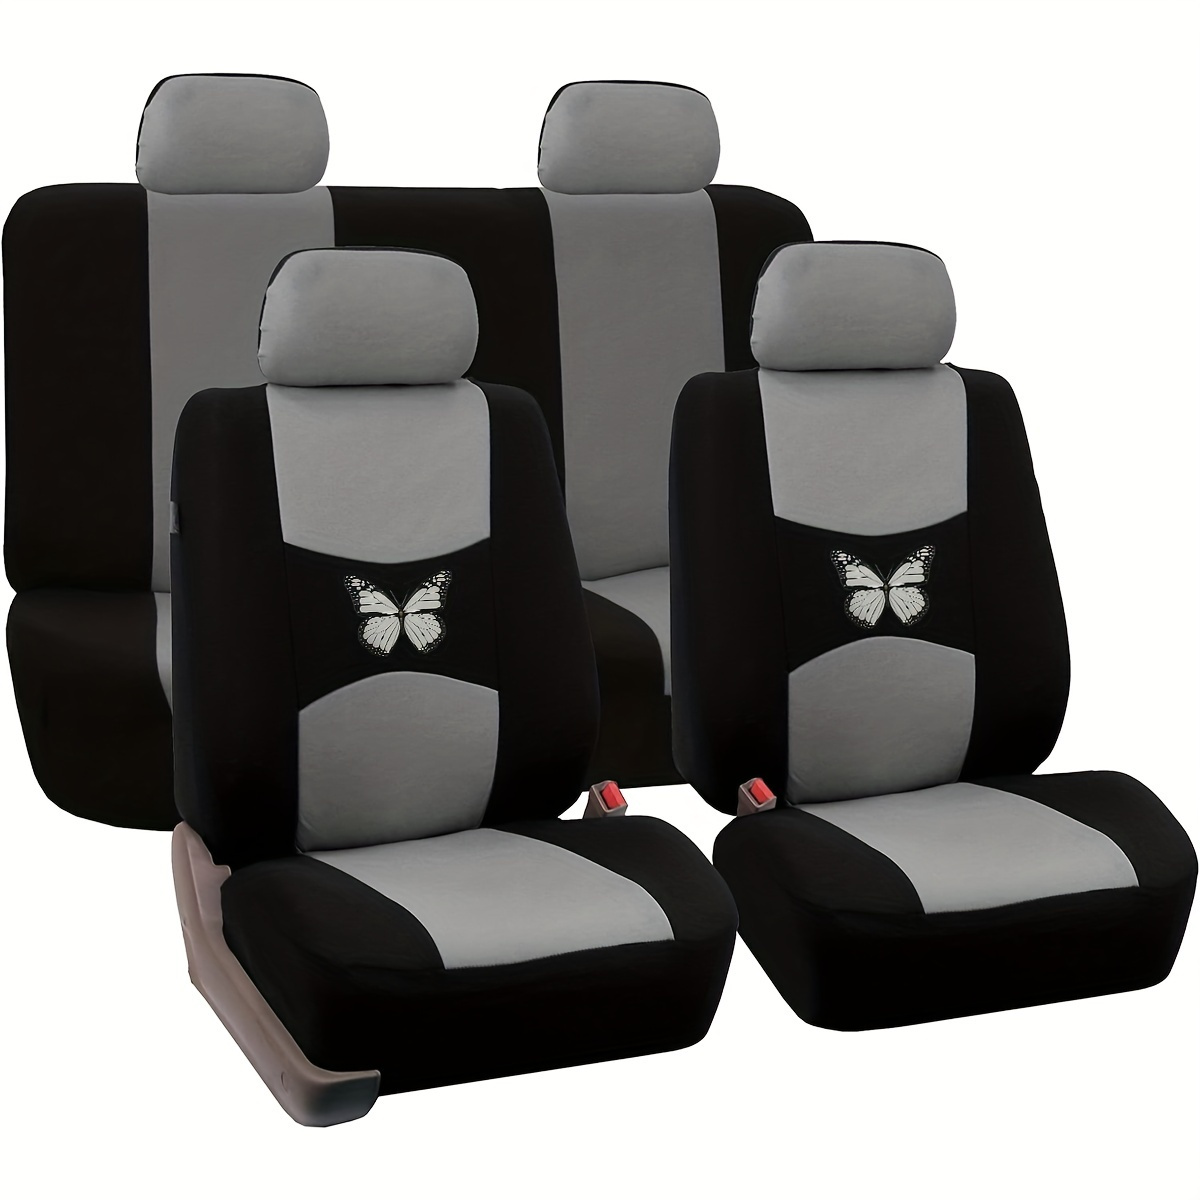 

Flat Cloth Butterfly Heat Transfer Car Seat Cover For 5 Seats ( Universal Model)